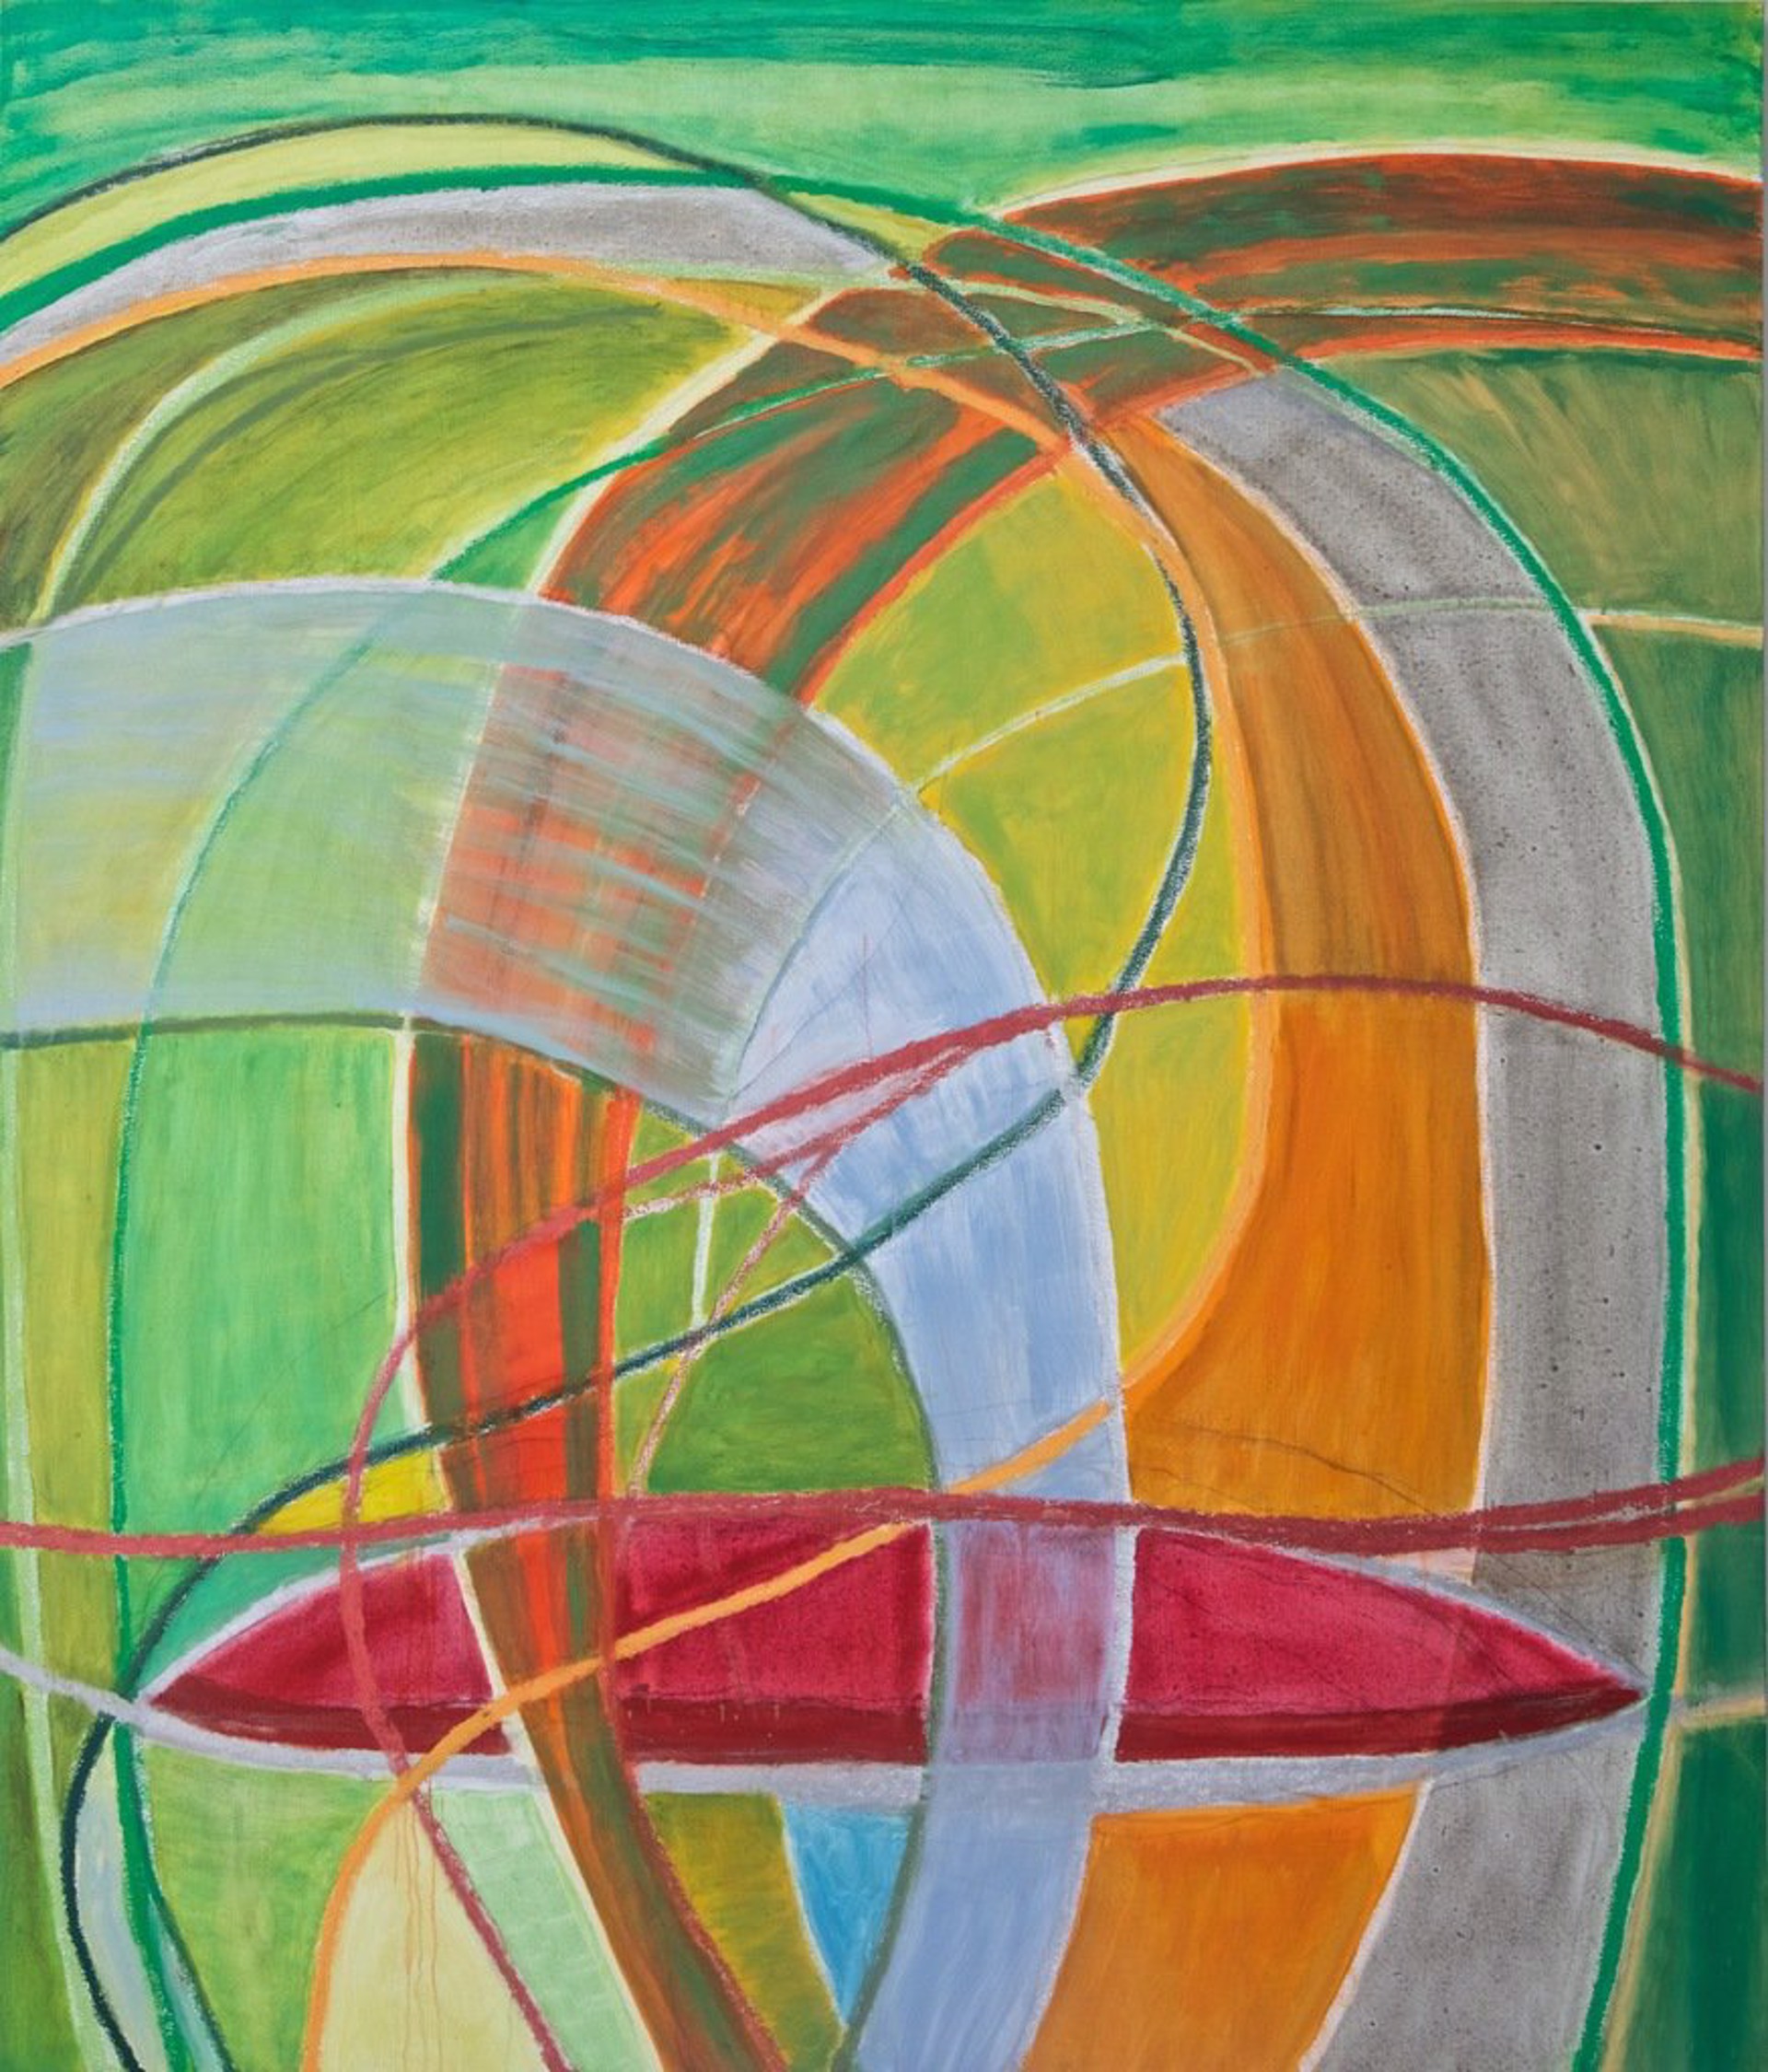 Colorsphere 3 (Green) by Susan Moss